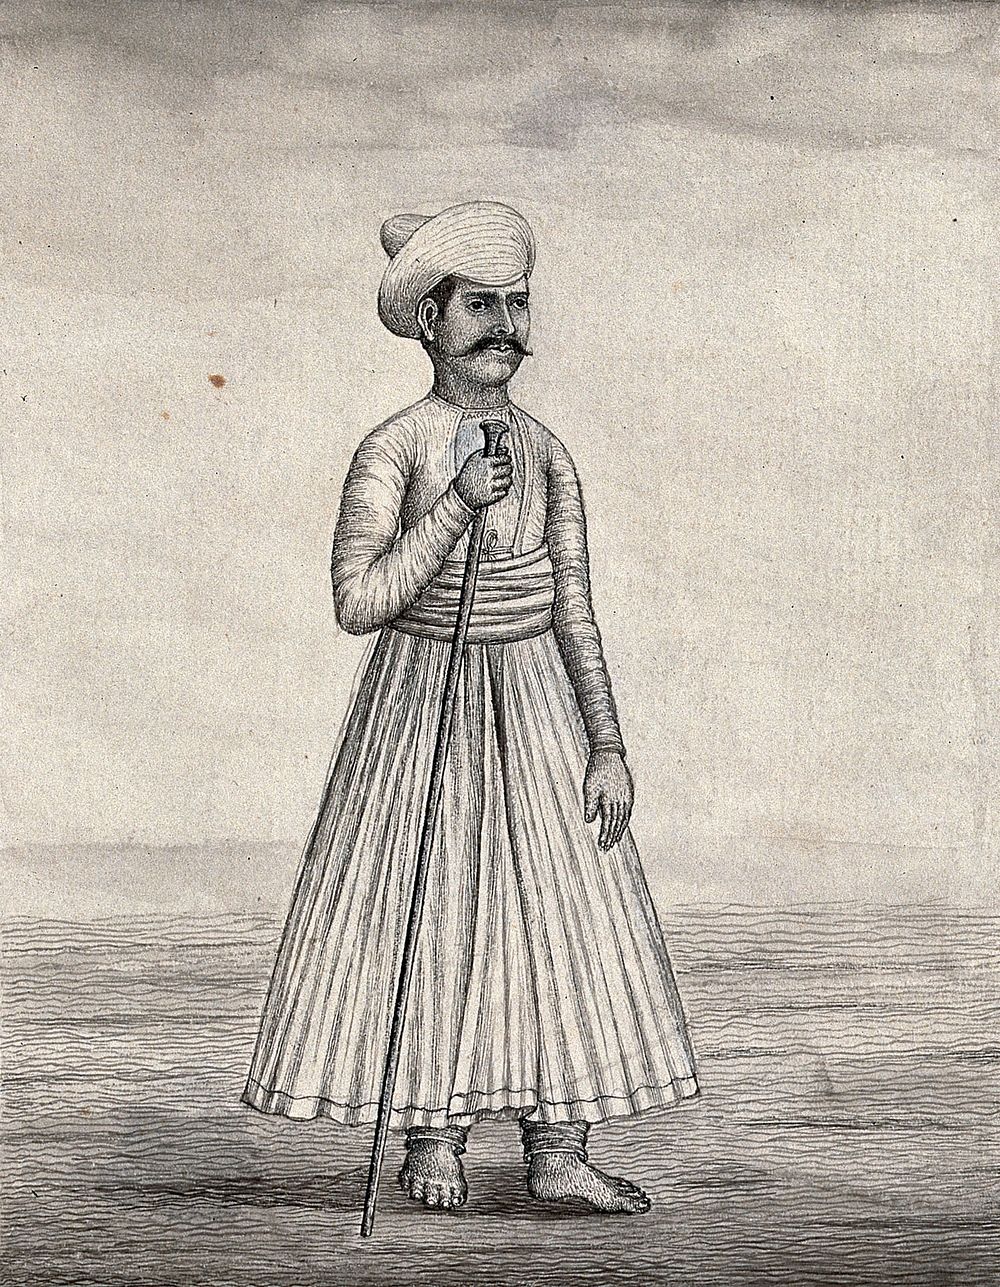 A burdar or servant holding a long stick, a badge of his office. Drawing by an Indian artist.